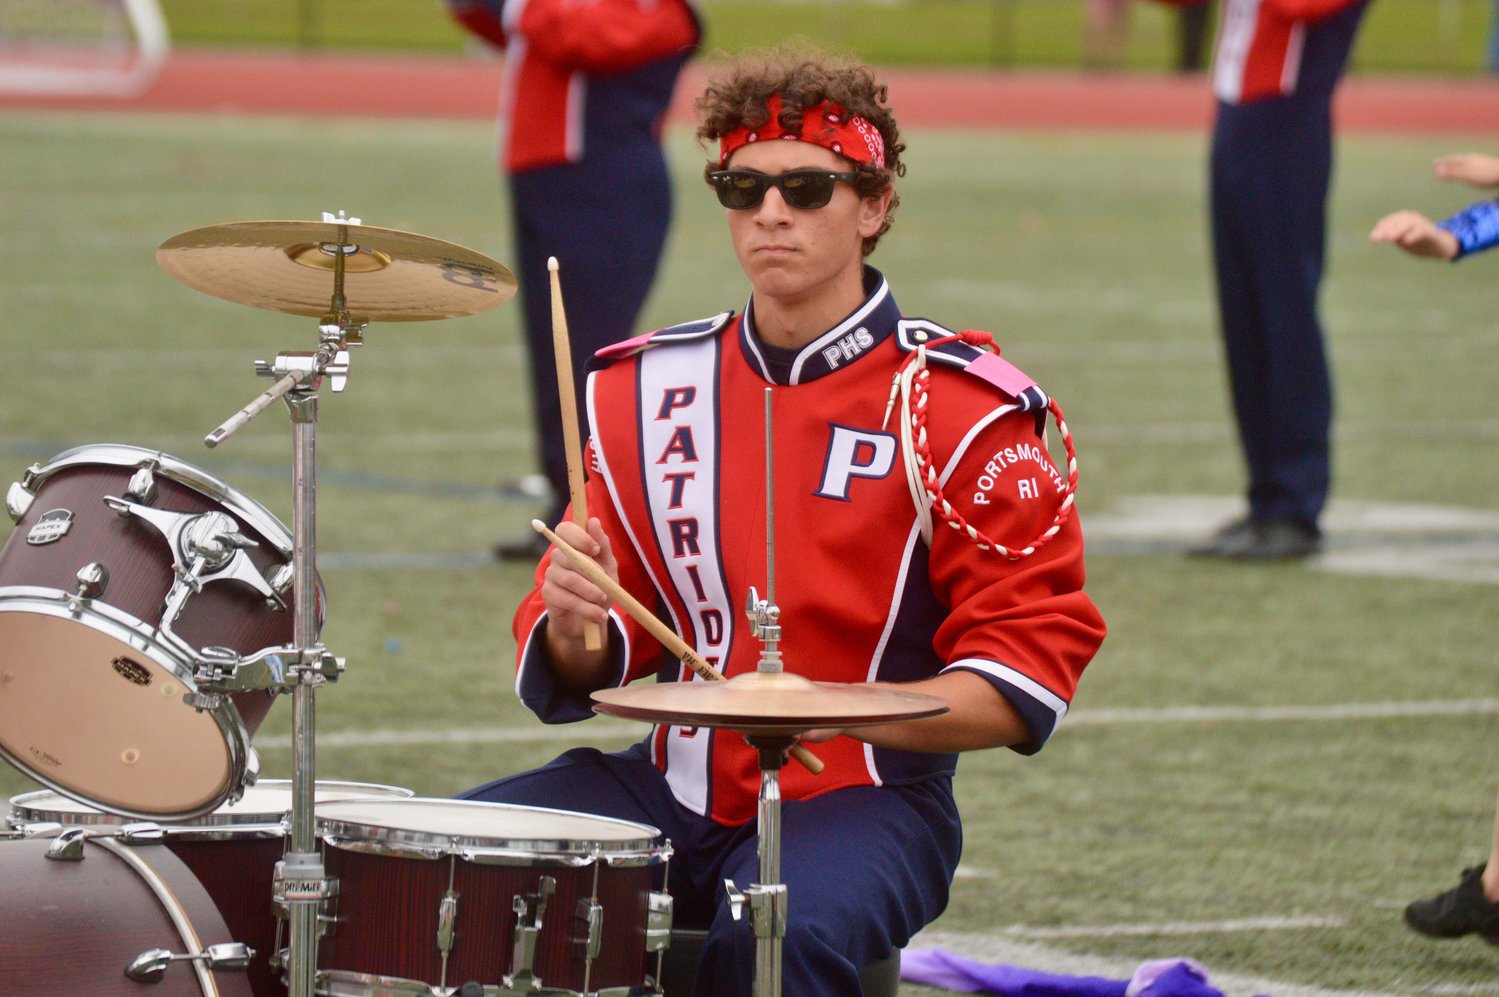 Nate Levine accompanies the marching band on drums during the halftime show.